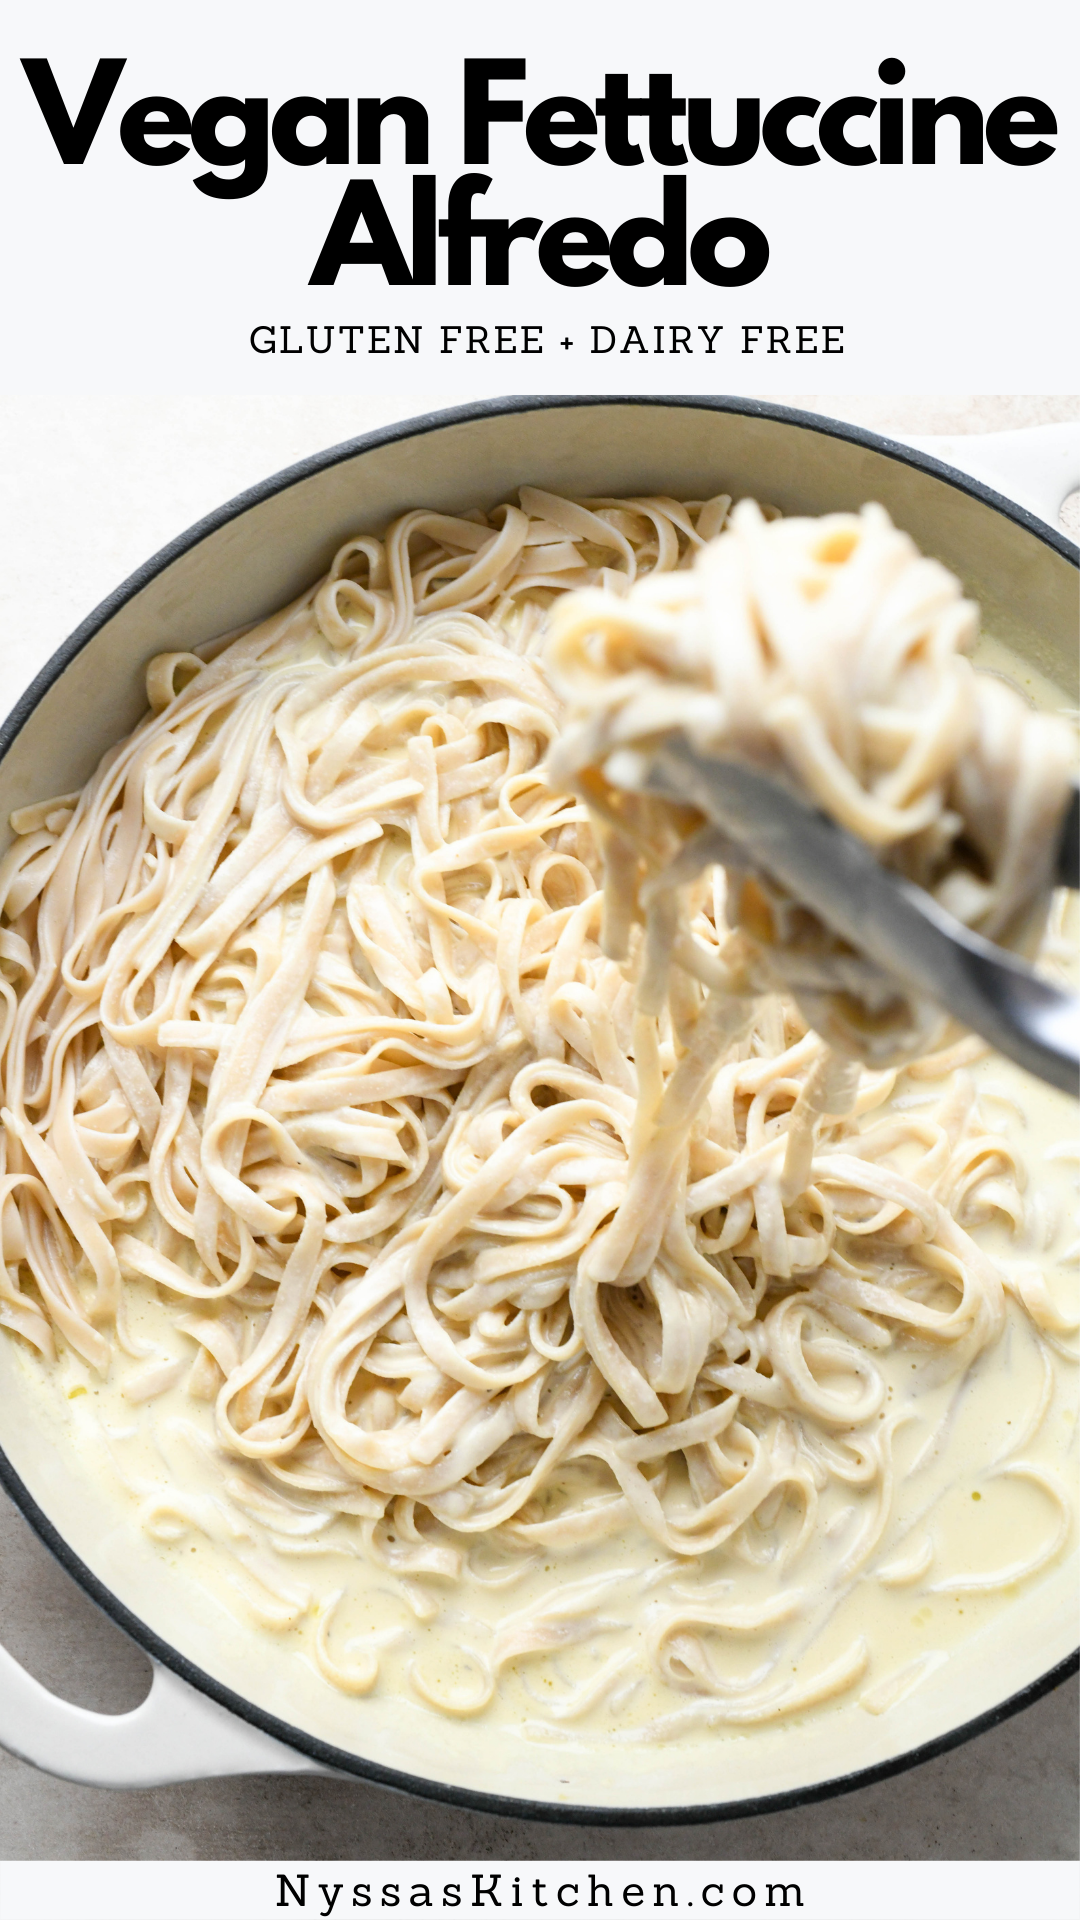 This vegan fettuccine alfredo is the best homemade dairy free pasta! Made with simple ingredients and so rich and creamy. Perfect for family dinner or a fancy date night in! Dairy free, gluten free, and vegetarian.